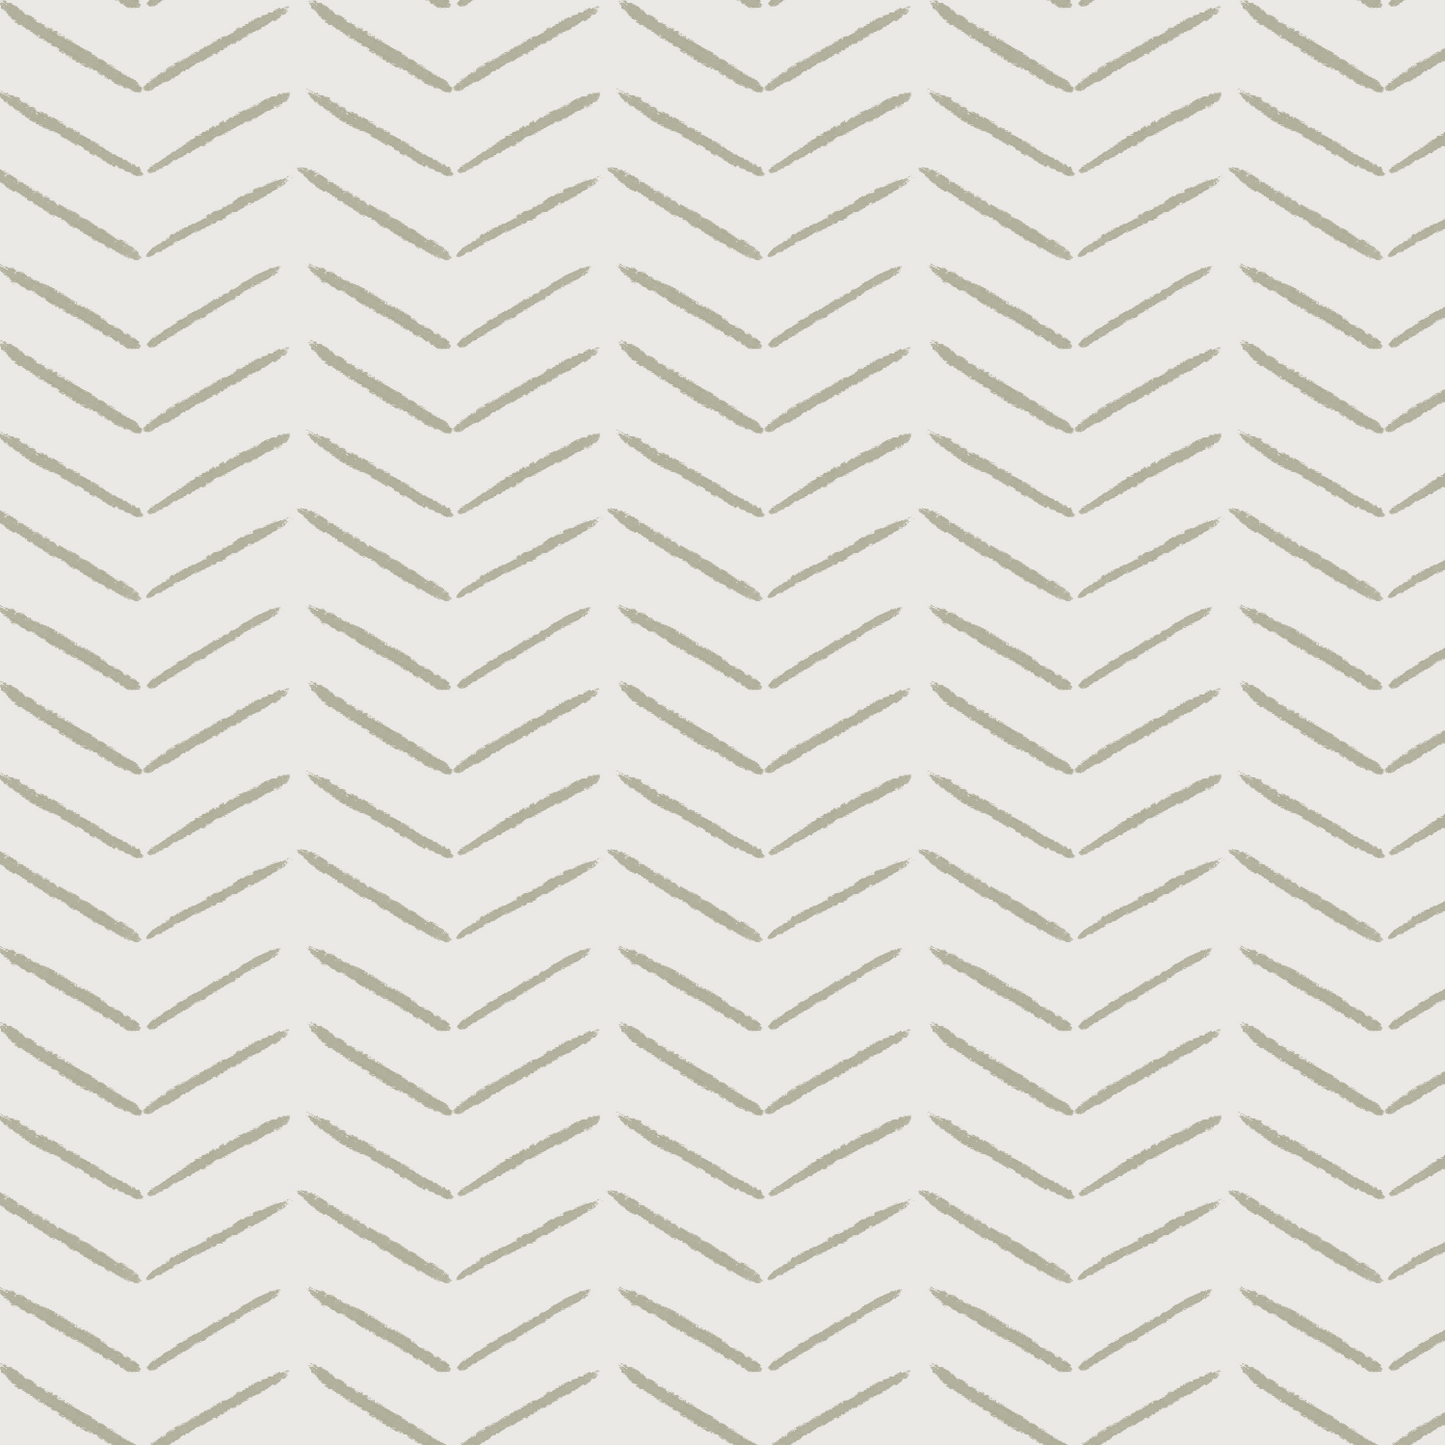 Load image into Gallery viewer, Herringbone Wallpaper Repeat Pattern | Olive - Munks and Me Wallpaper
